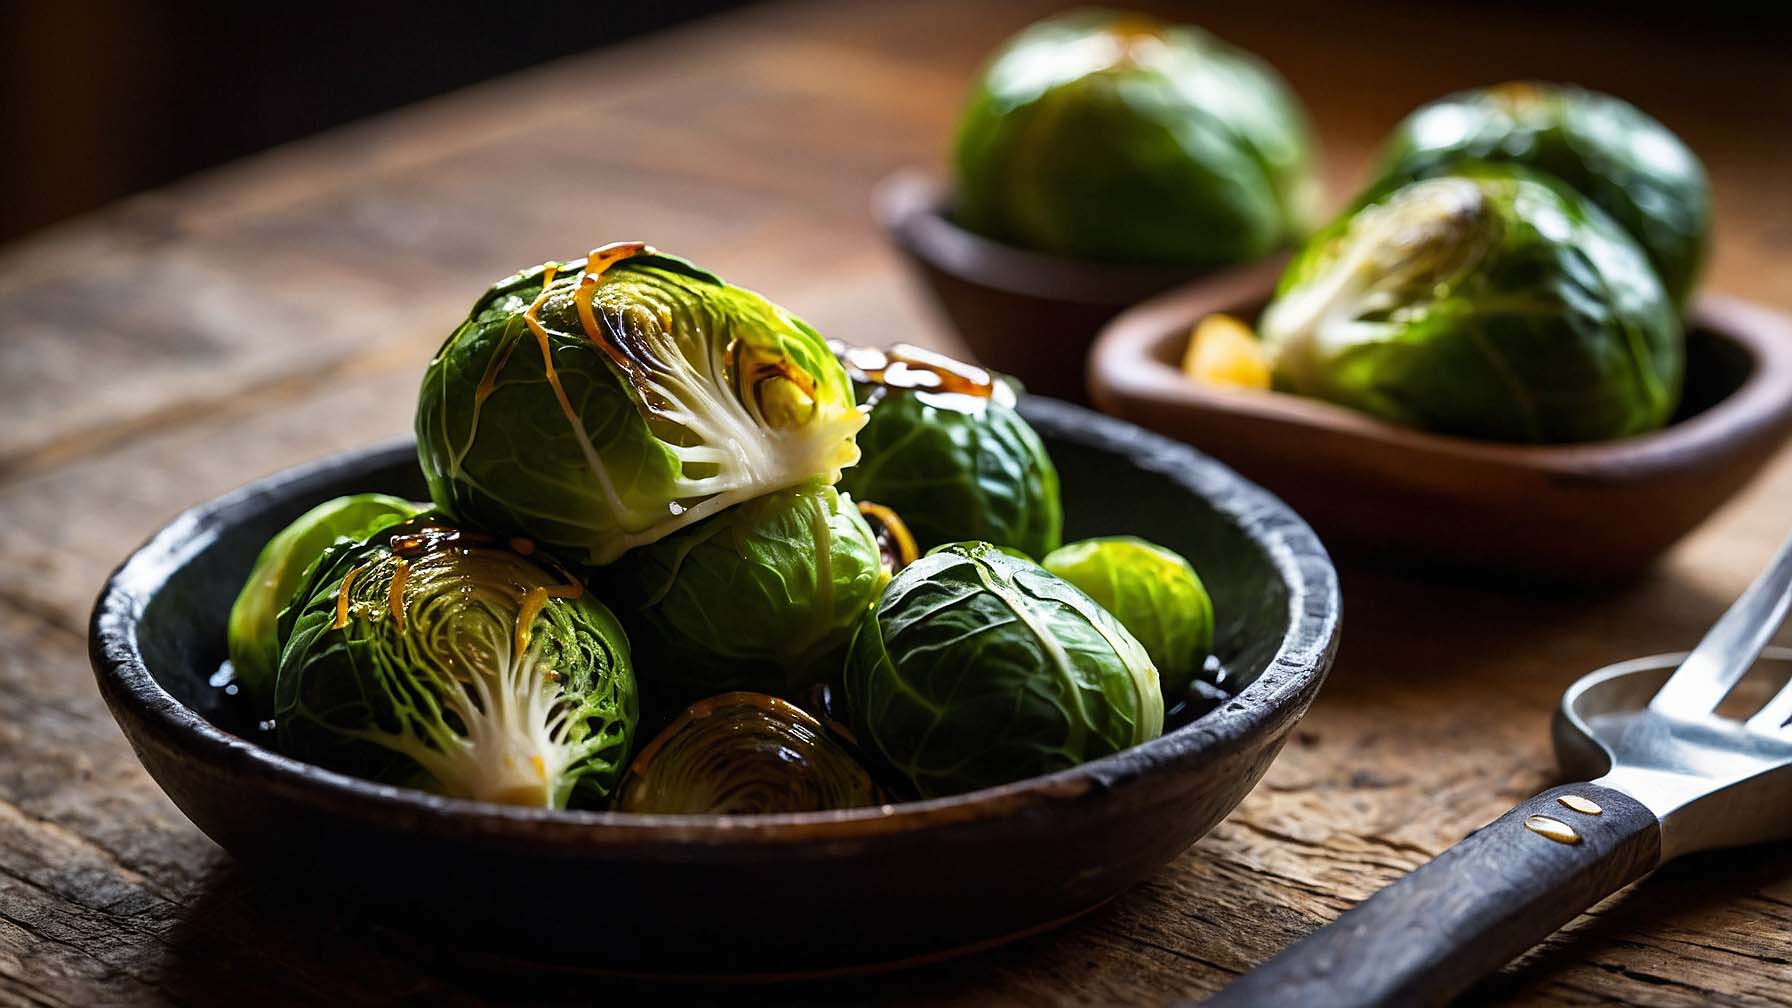 How Many Brussels Sprouts Per Person